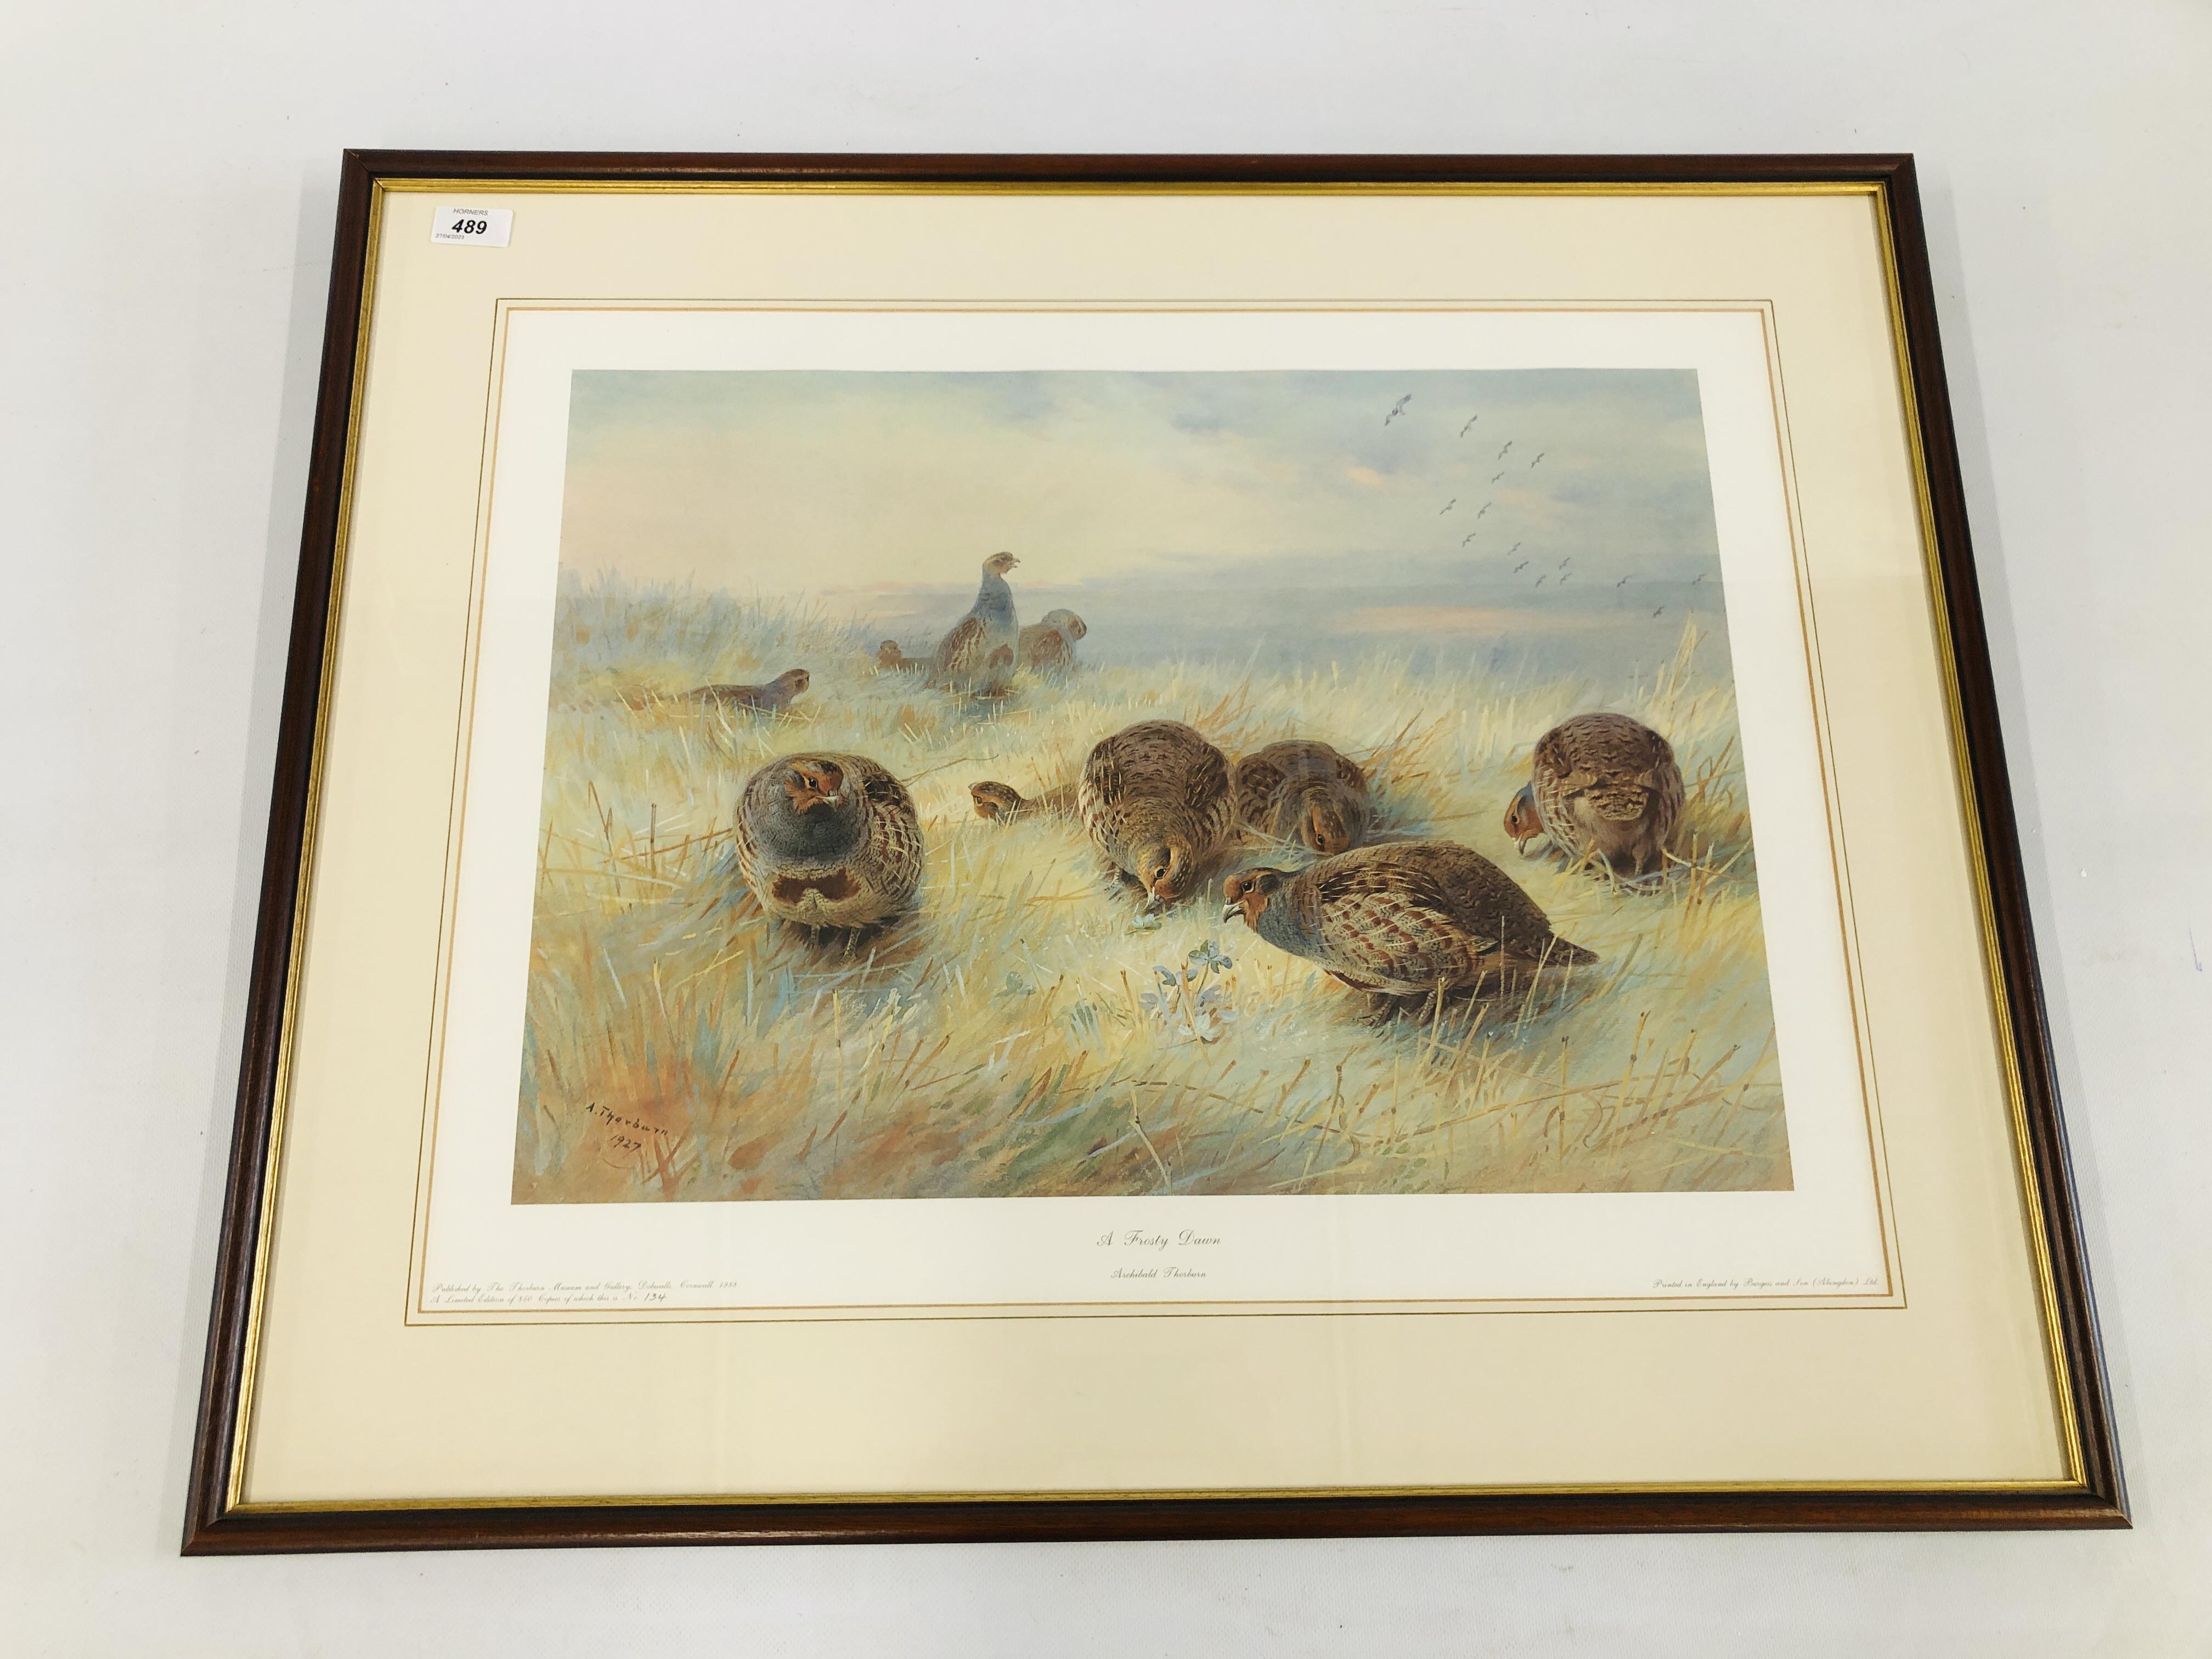 PRINT - ARCHIBALD THORBURN - A FROSTY DAWN LTD EDITION 134 OF 850 BY THORBURN MUSEUM AND GALLERY